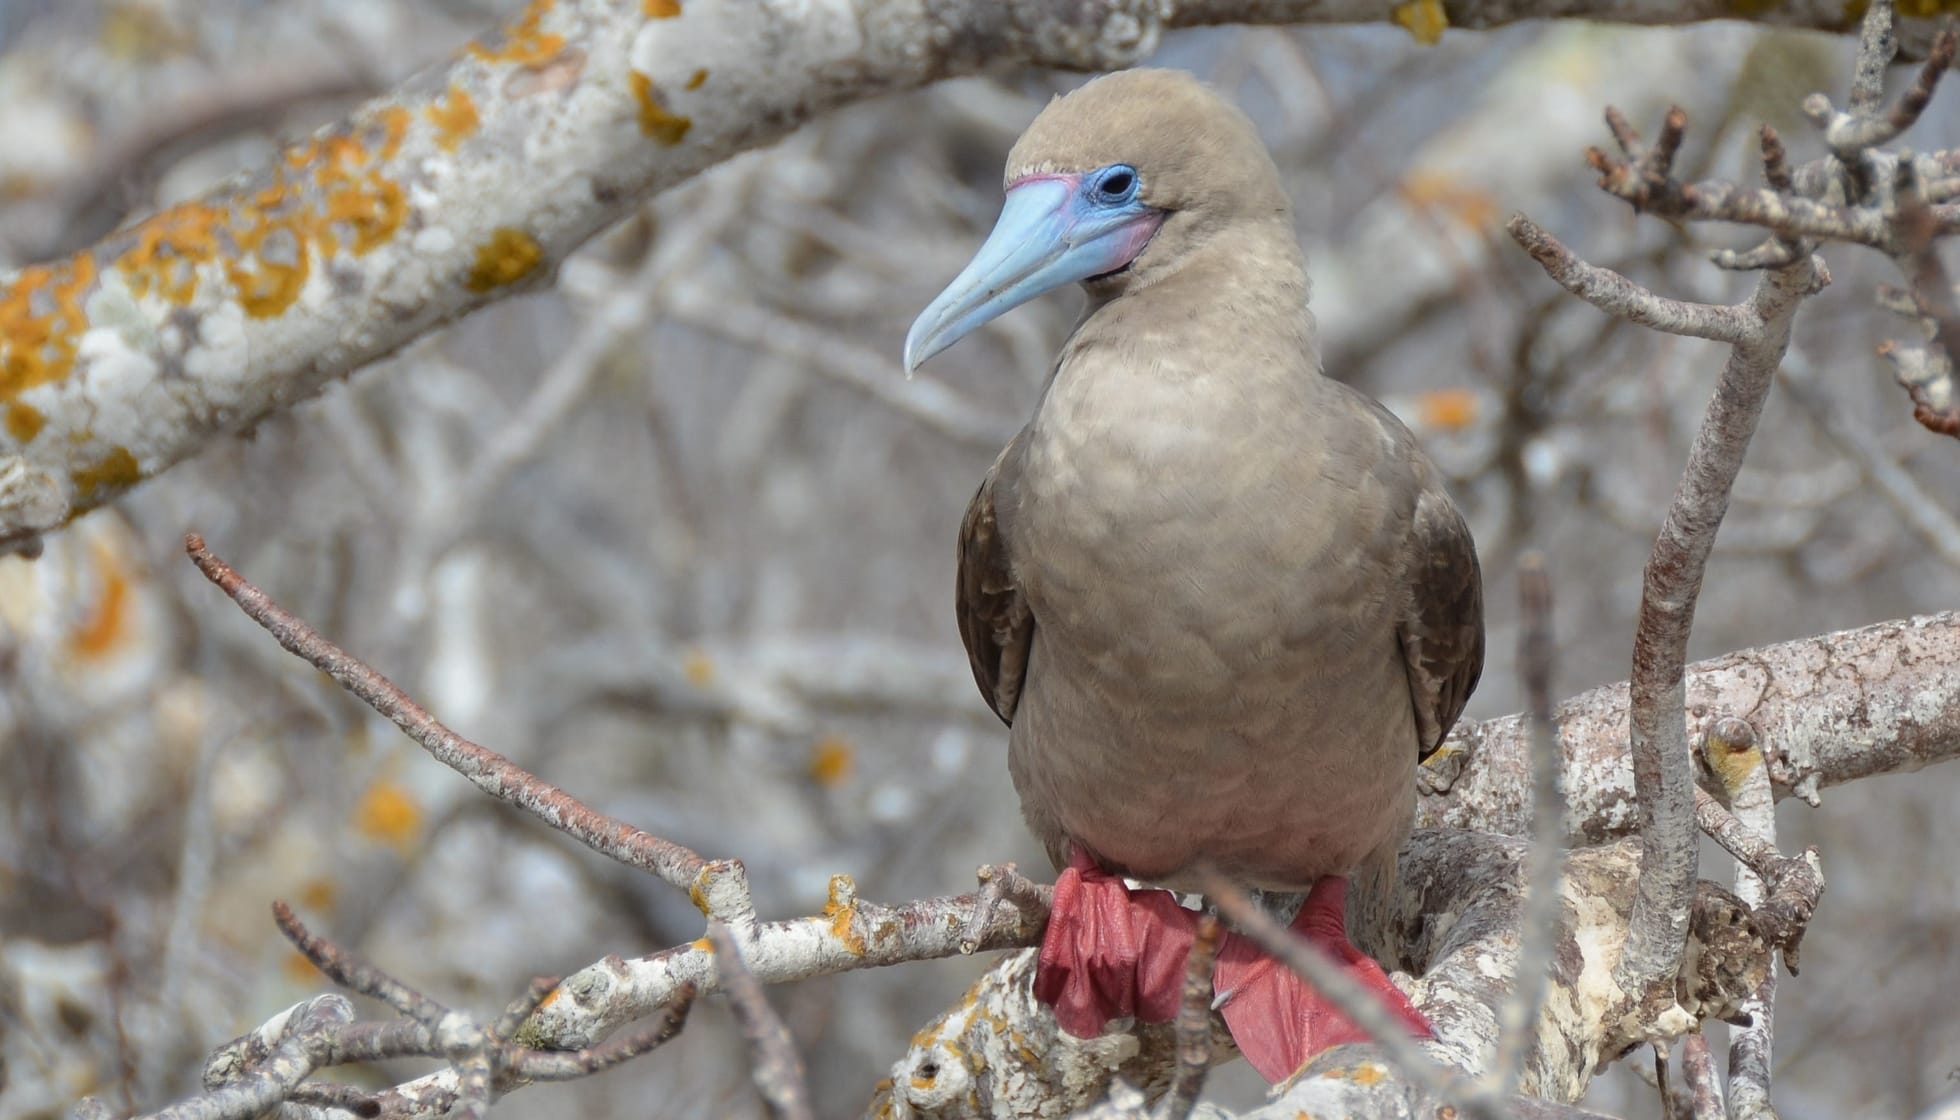 Red-Footed Booby perched on a tree